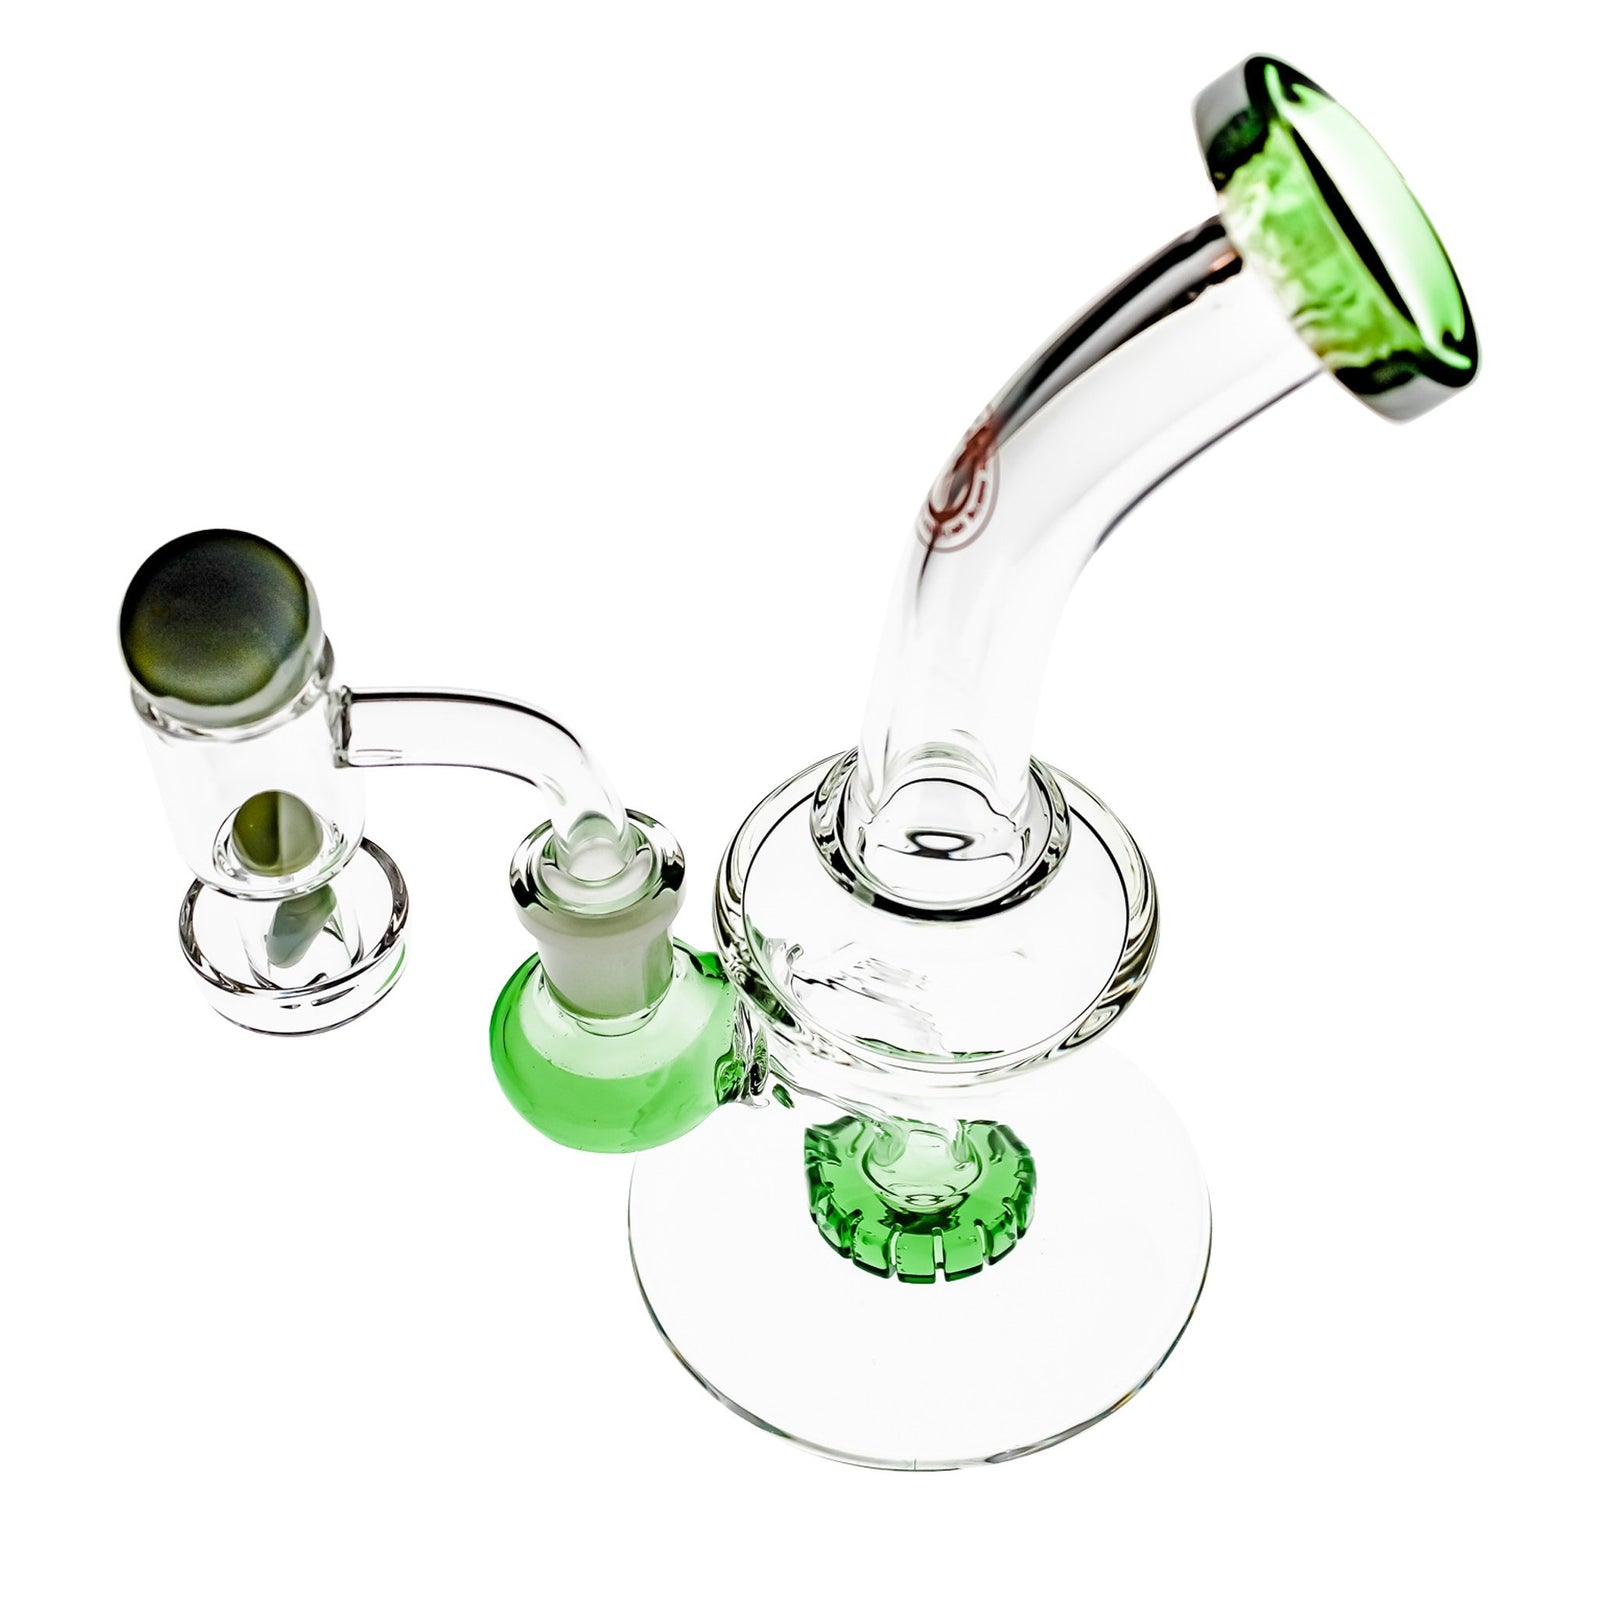 All Dabbing Products, Dab Well For Less